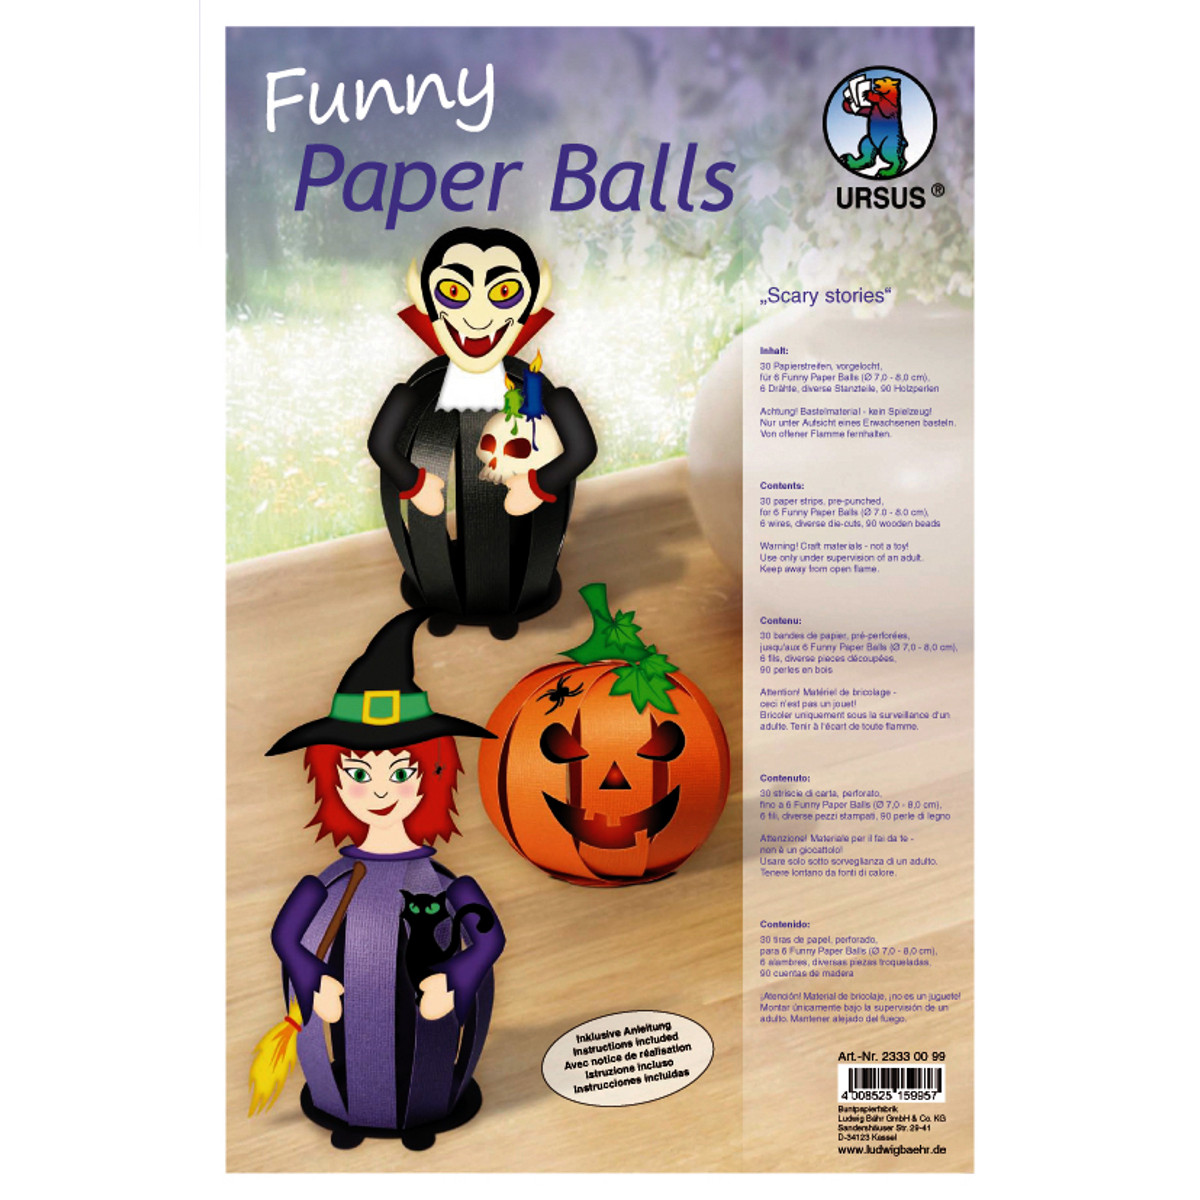 Funny Paper Balls "Scary stories"